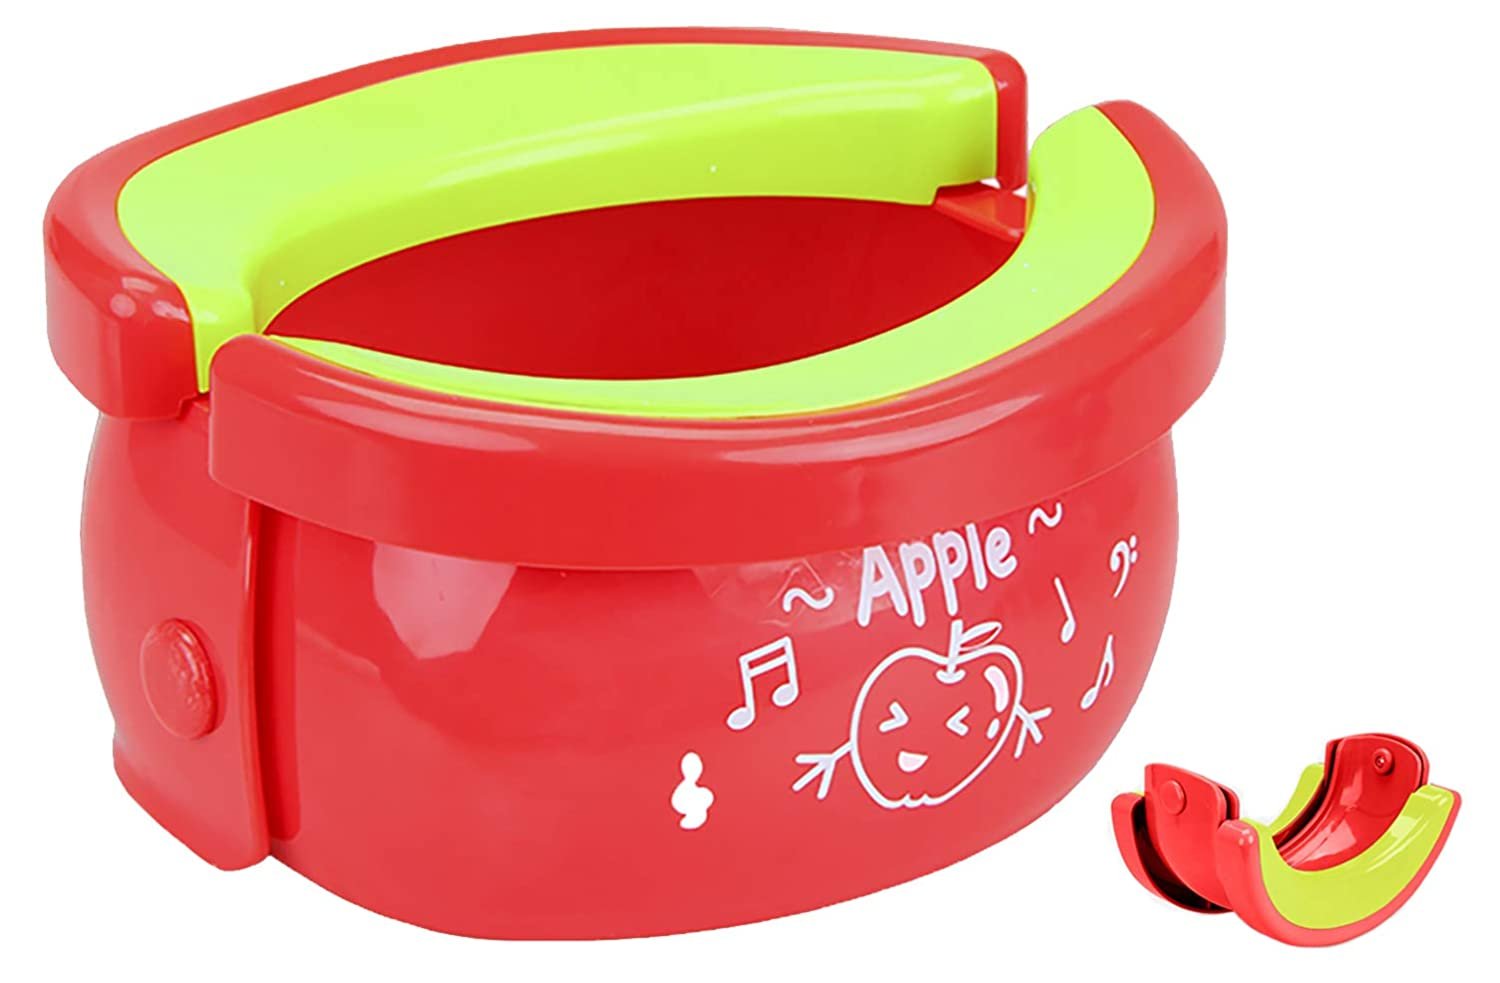 Travel Toilet Seat & Potty Trainer for Kids with Splash Guard, Apple,  Free Shipping & Returns